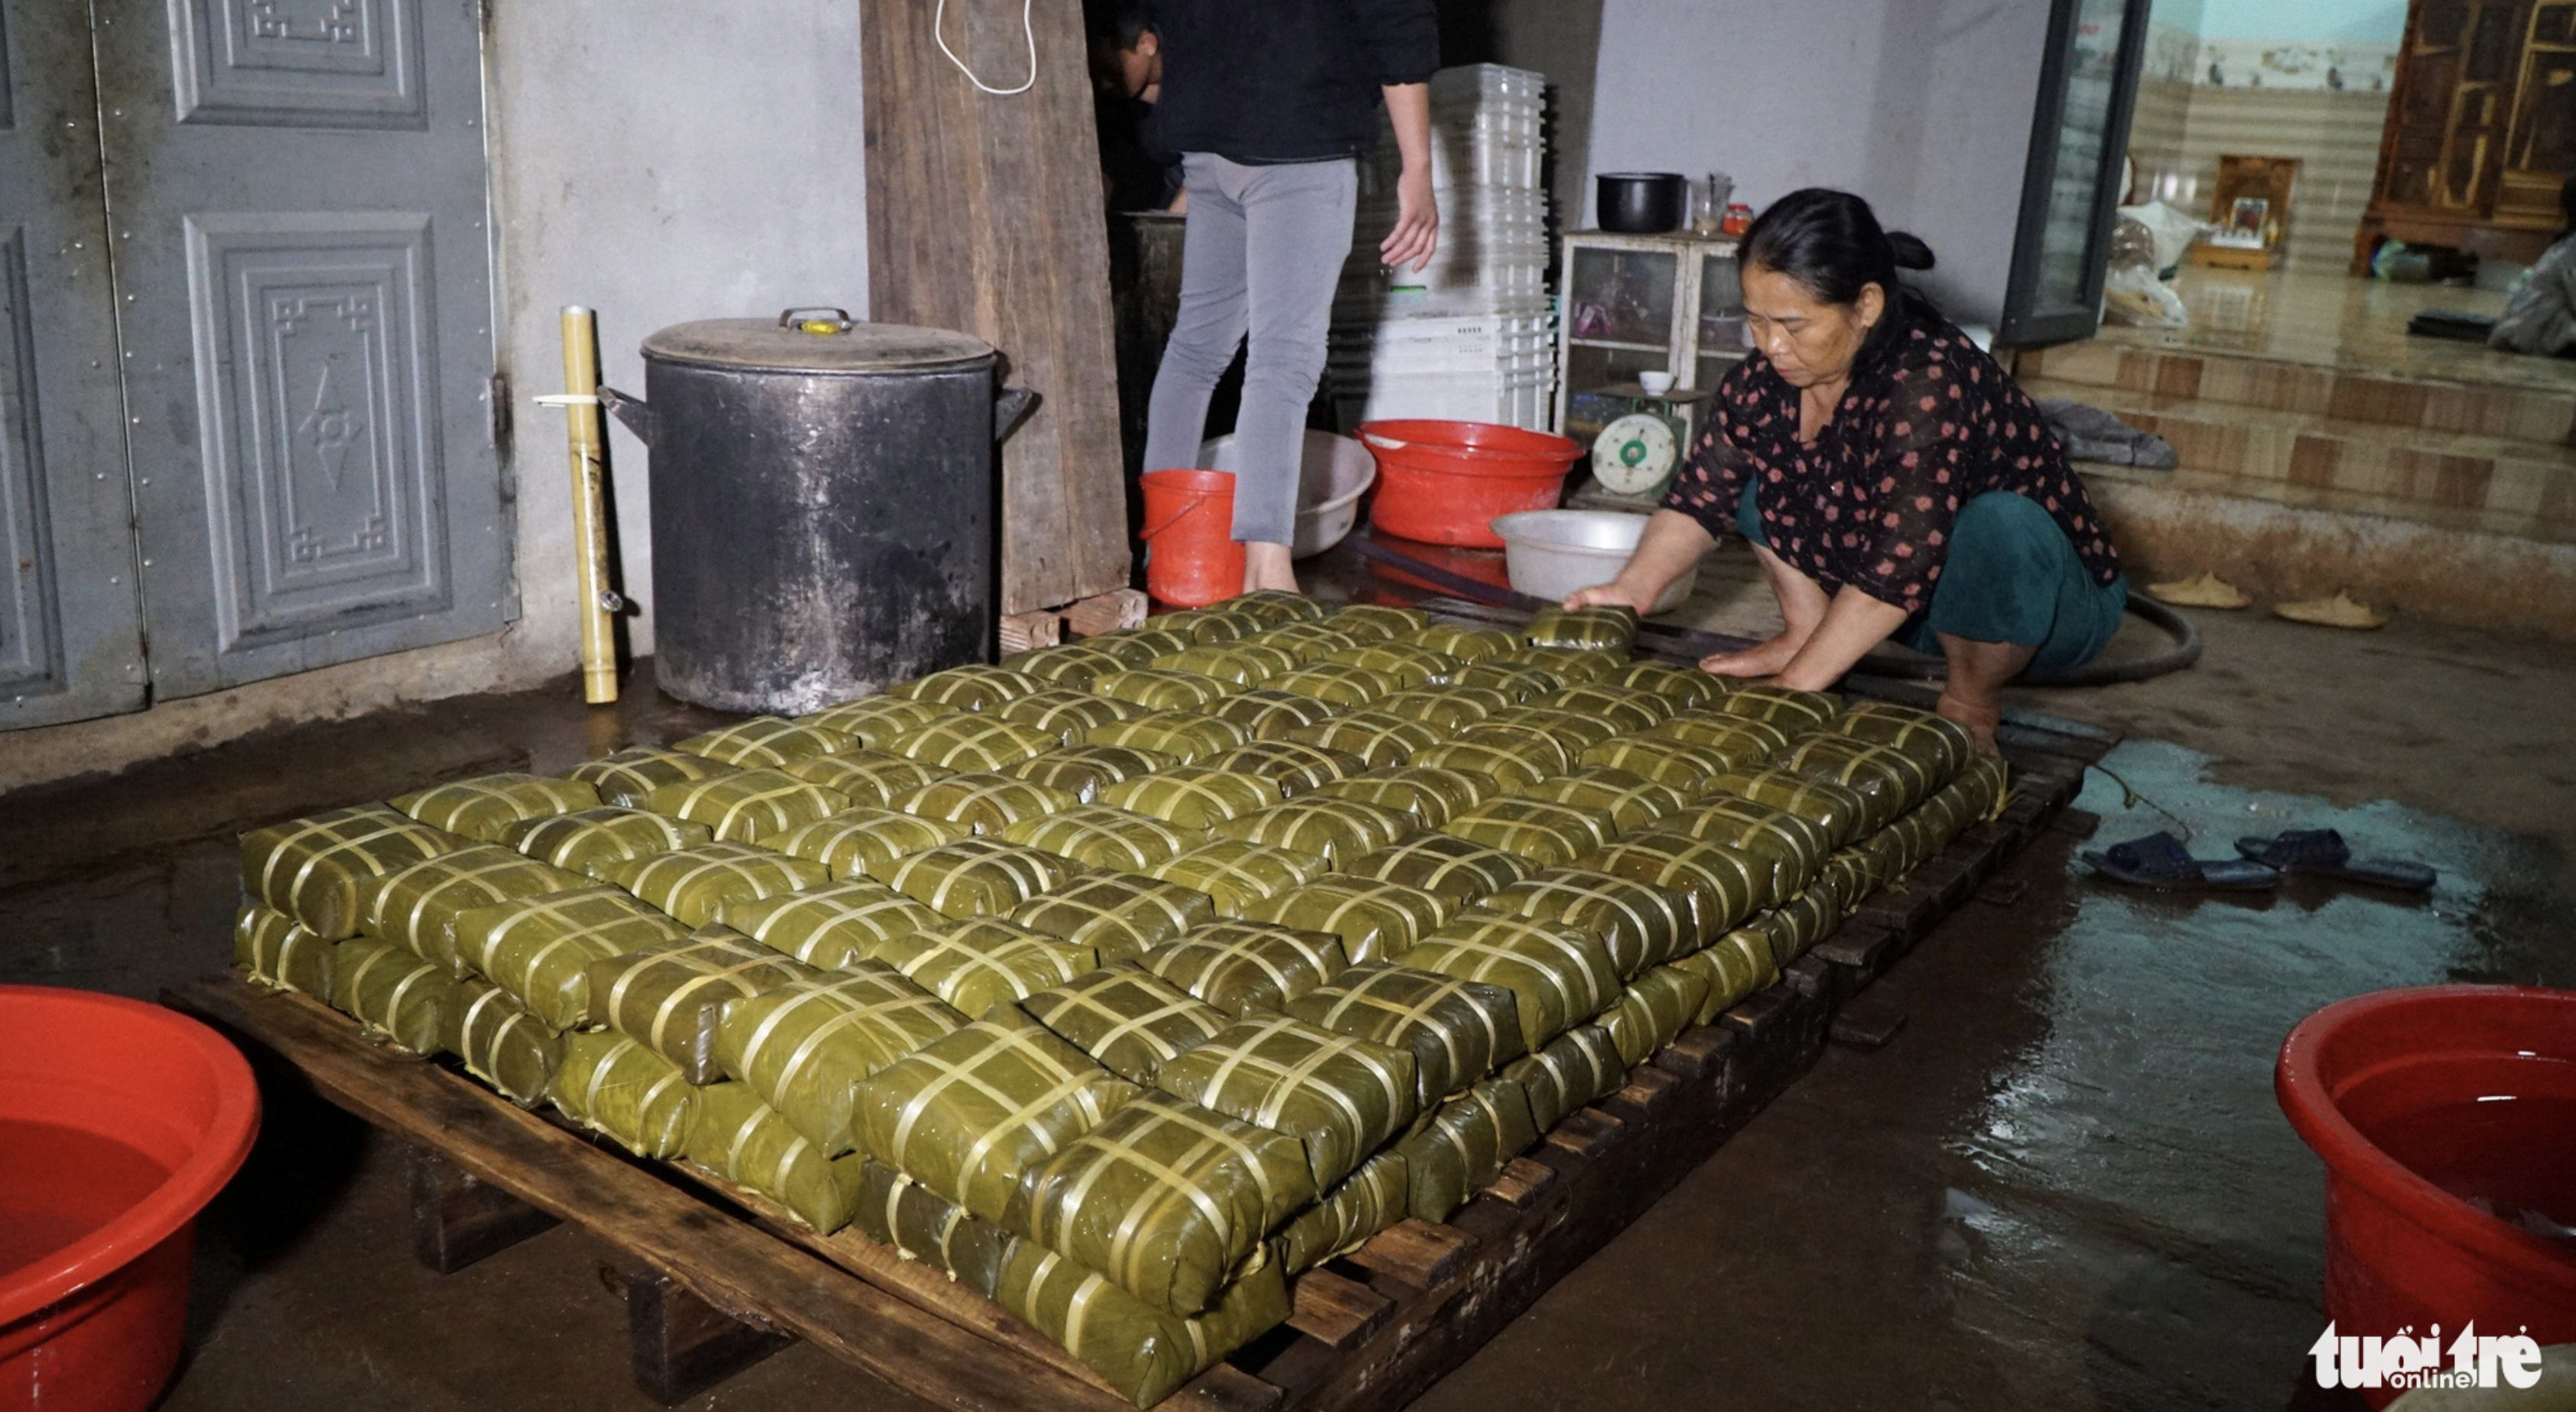 After being cooked, banh chung is fished out of a pot. Photo: Tuoi Tre